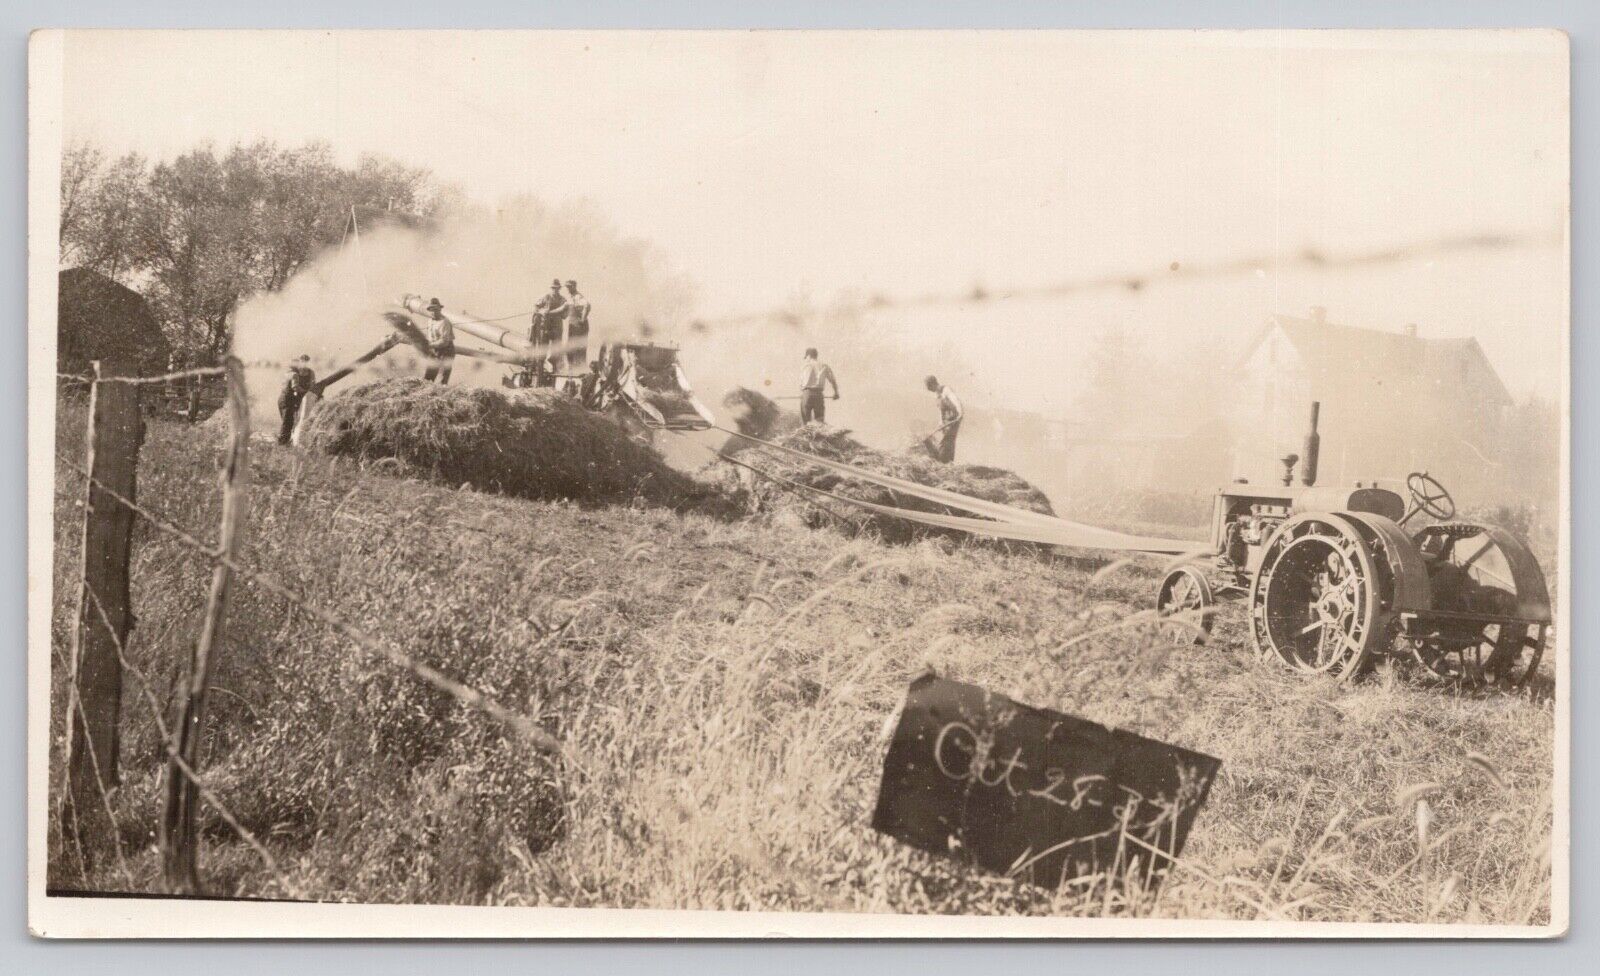 October 28th, 1937 Very Old RPPC Bailing Hay with Tractor - B2